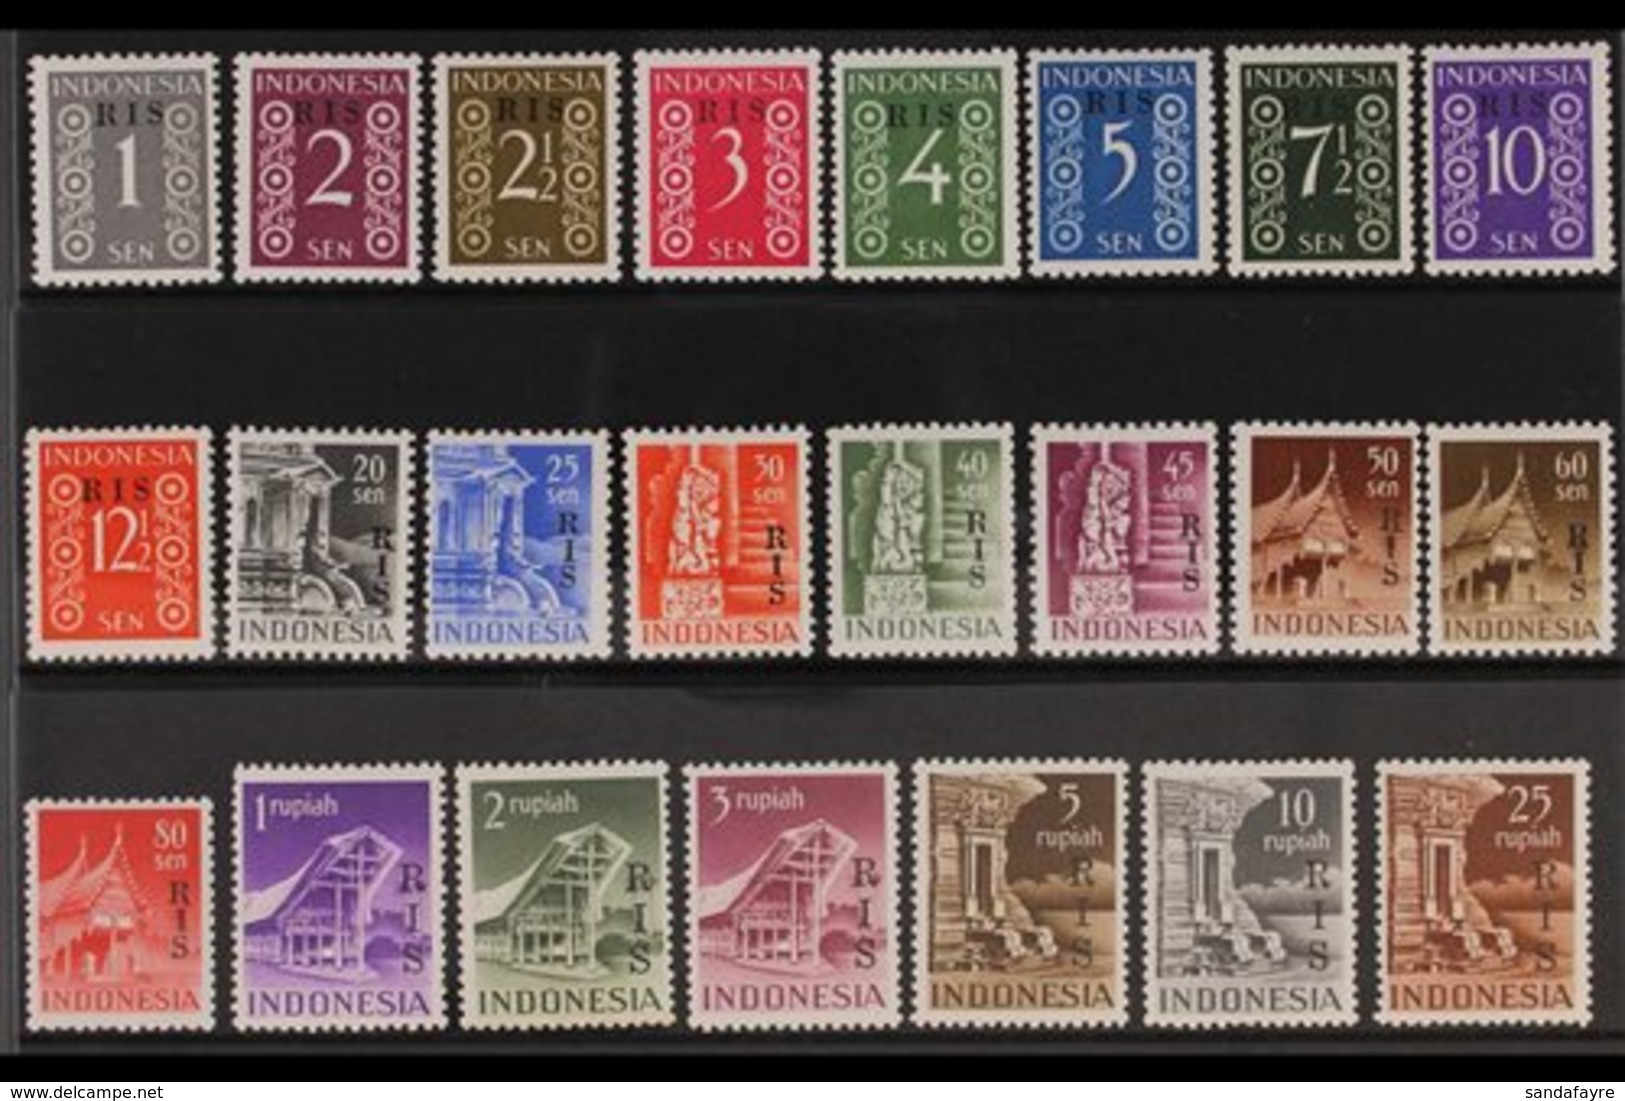 1950  Netherland Indies "R I S" Overprinted Complete Set, SG 579/601, Scott 335/58, Never Hinged Mint (23 Stamps) For Mo - Indonesia